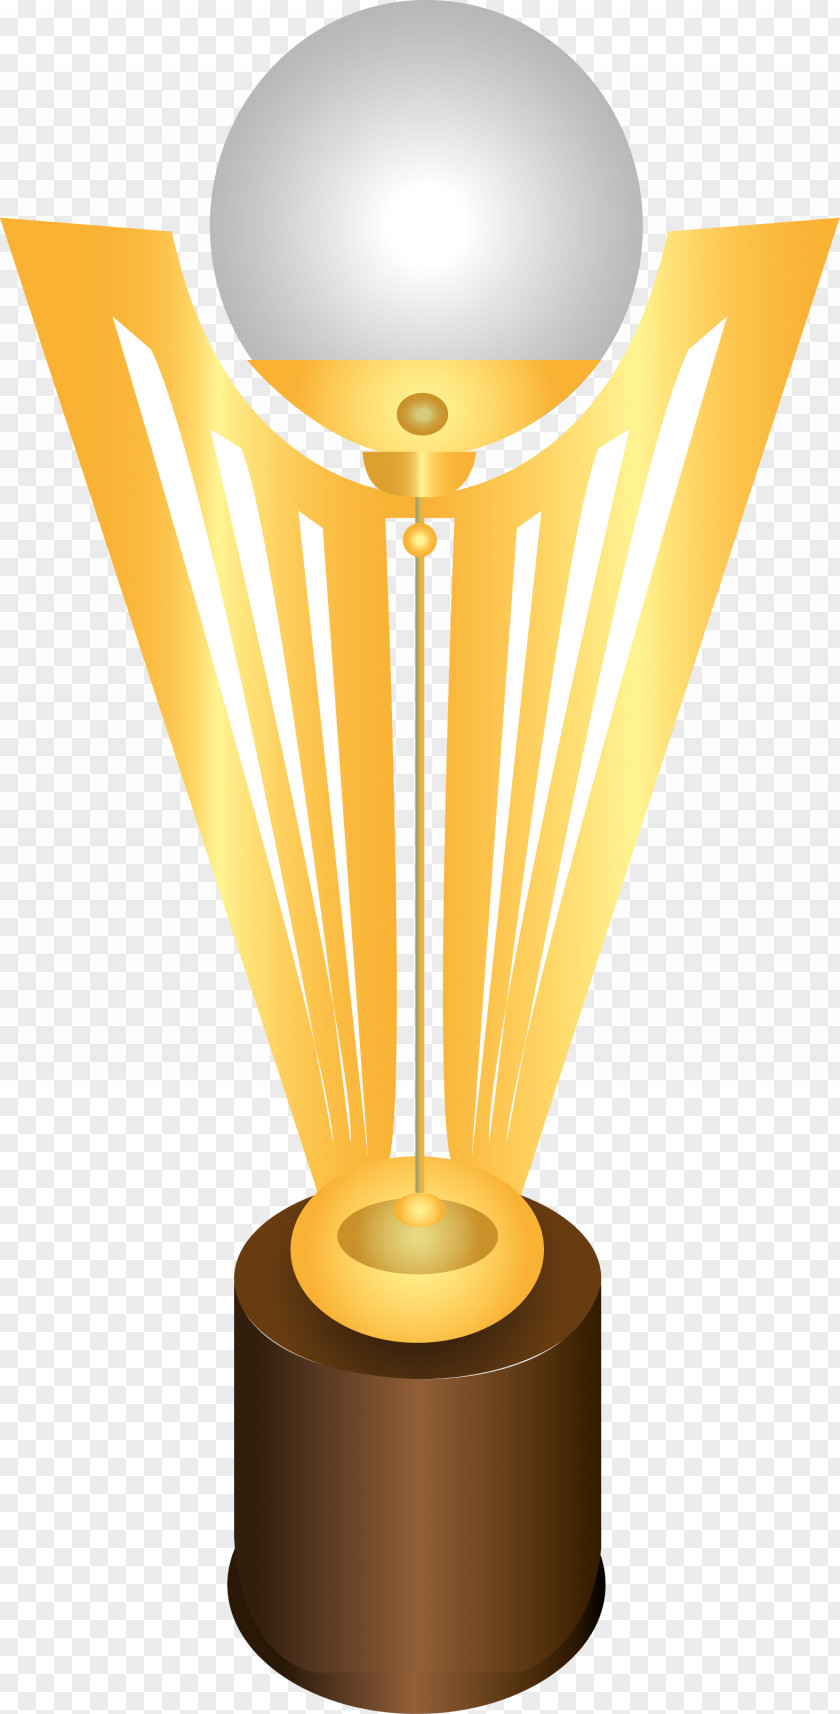 Trophy 2011 Copa Centroamericana 2017 2007 UNCAF Nations Cup 2013 1991 PNG